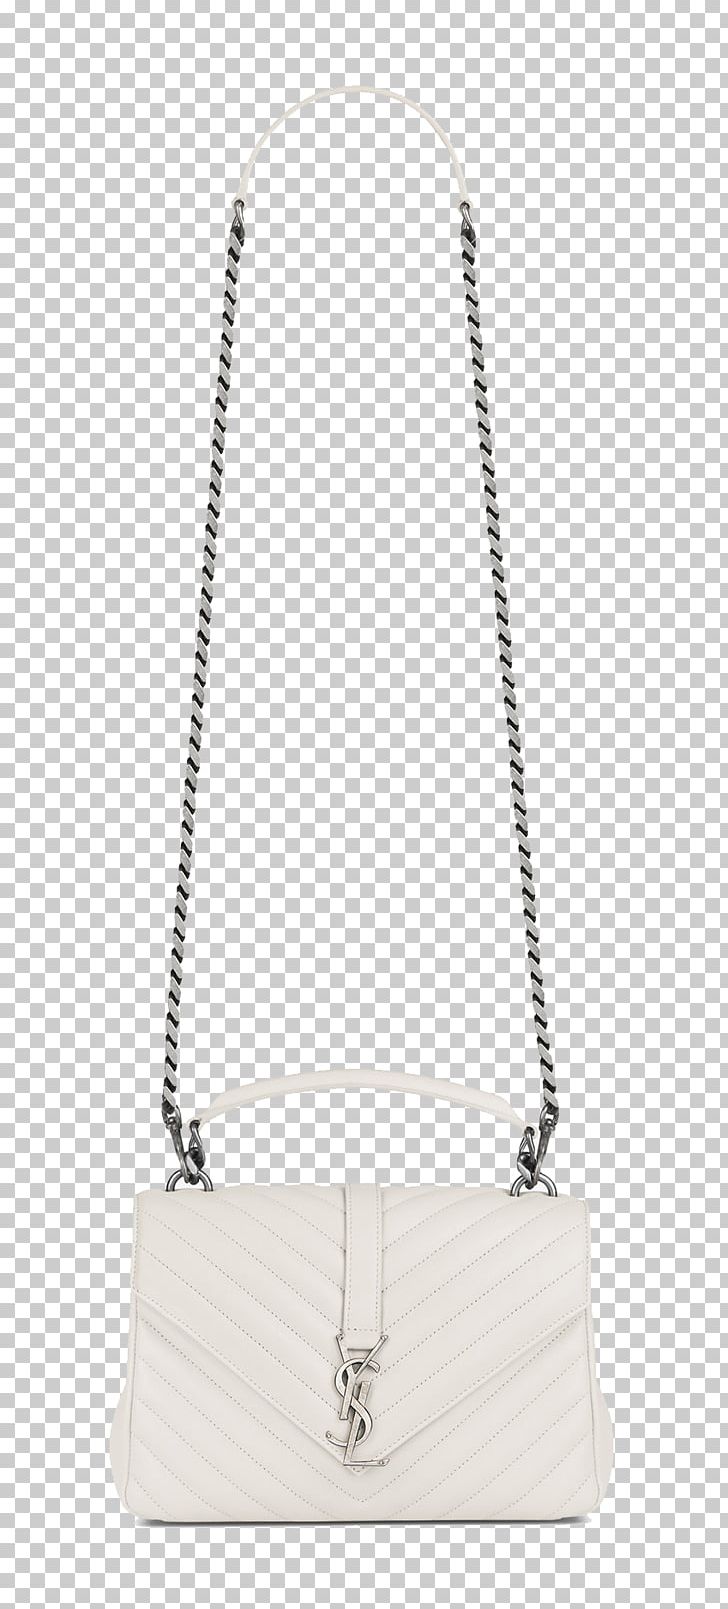 Handbag Yves Saint Laurent Black And White PNG, Clipart, Bag, Bags, Beige, Black And White, Chain Free PNG Download